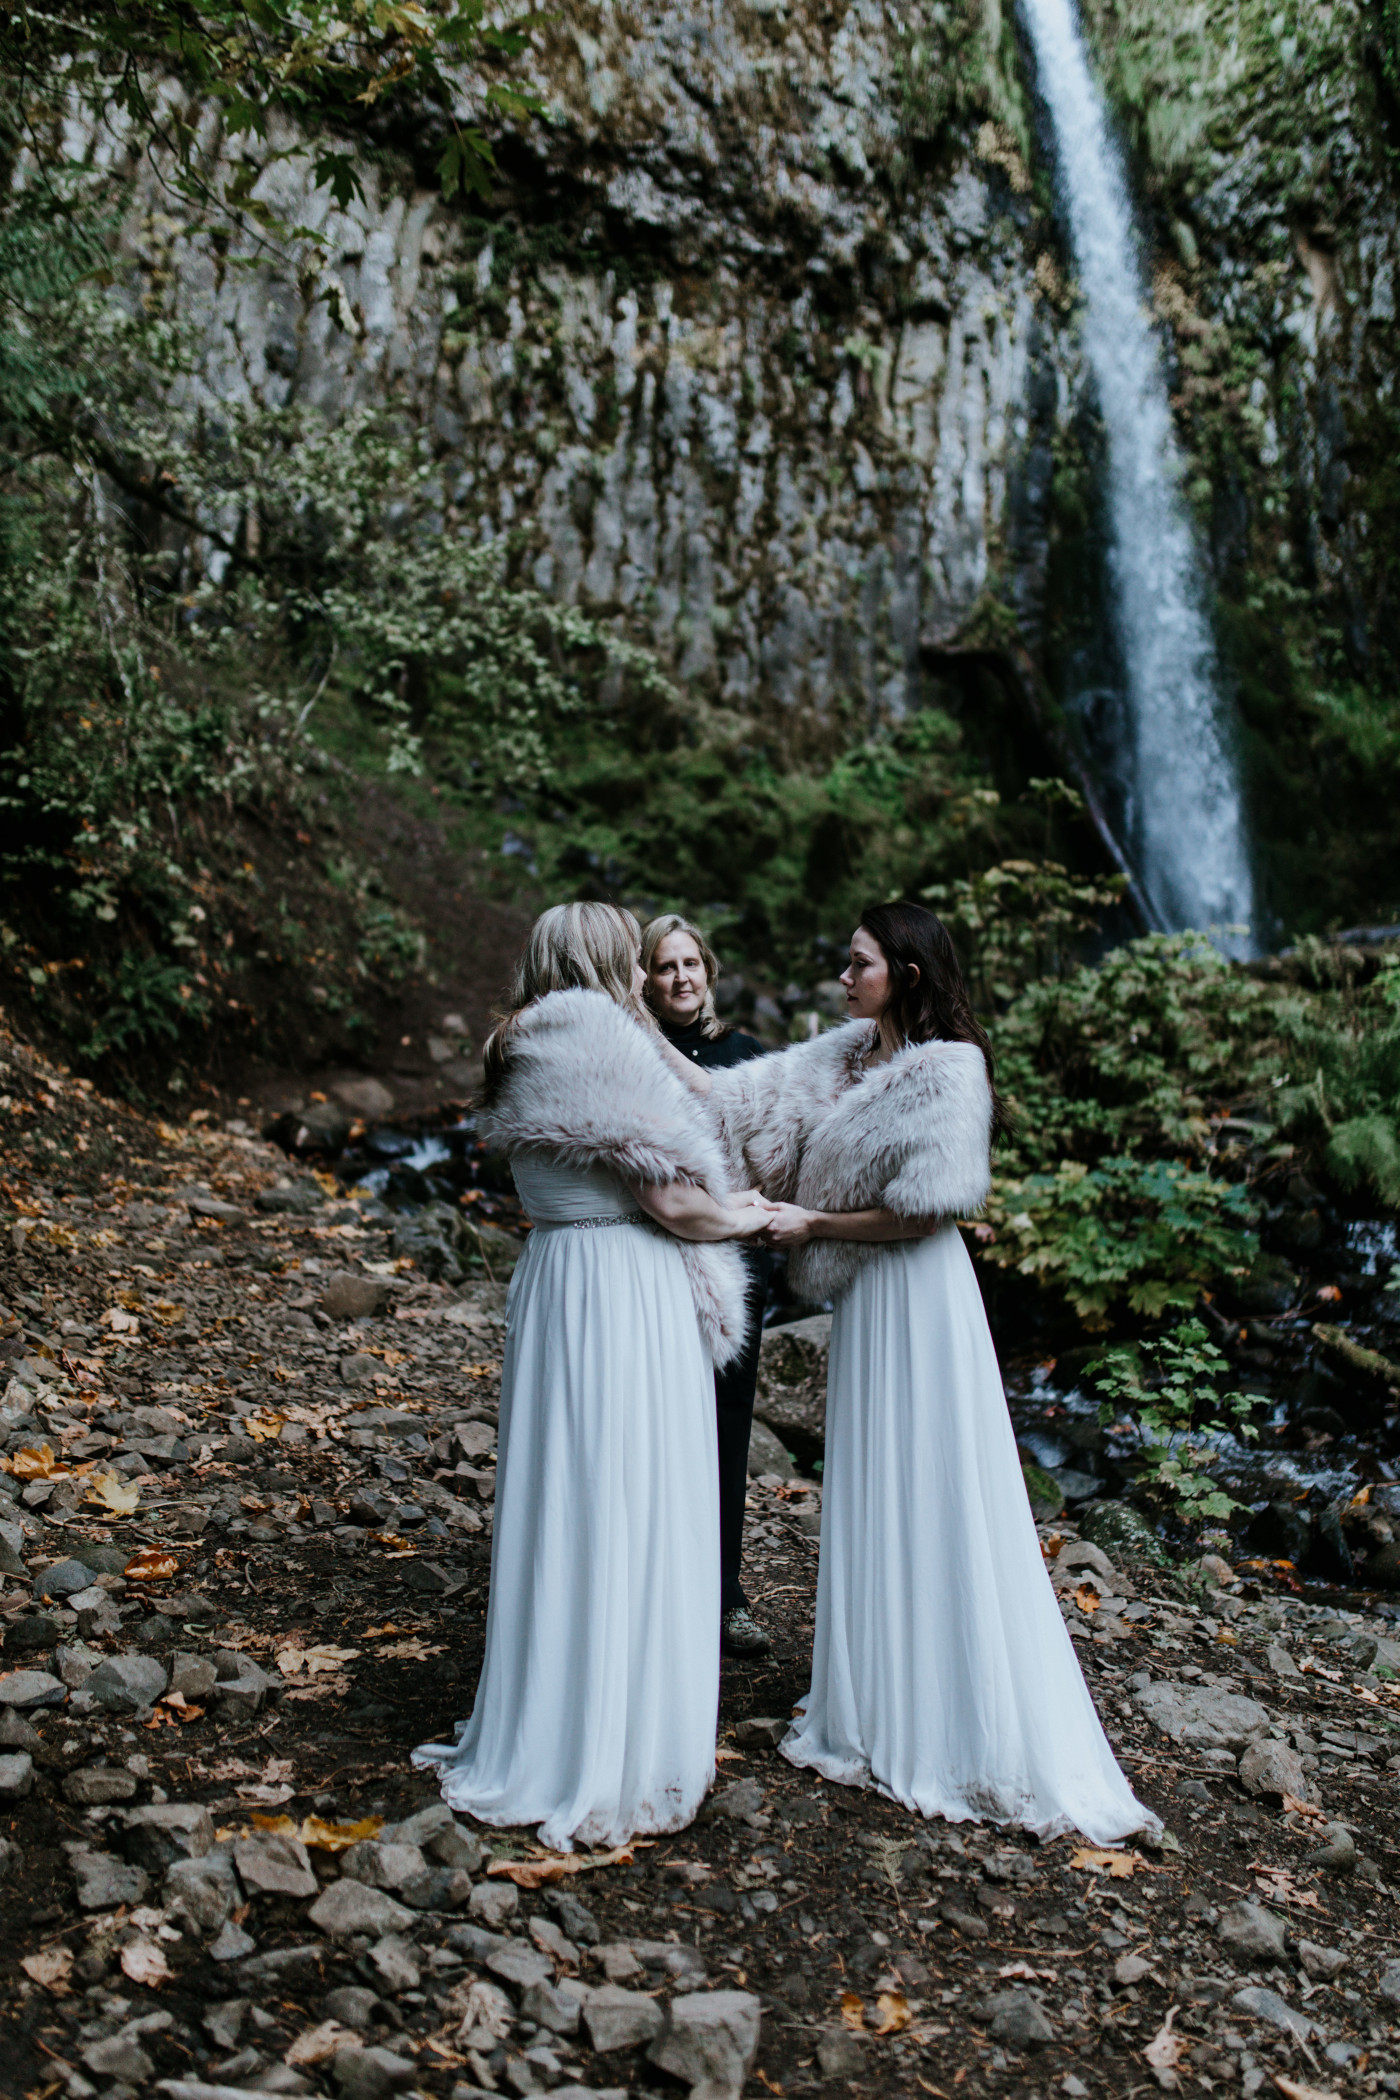 Hayley and Tiffany stand together at their elopement. Elopement photography at the Columbia River Gorge by Sienna Plus Josh.